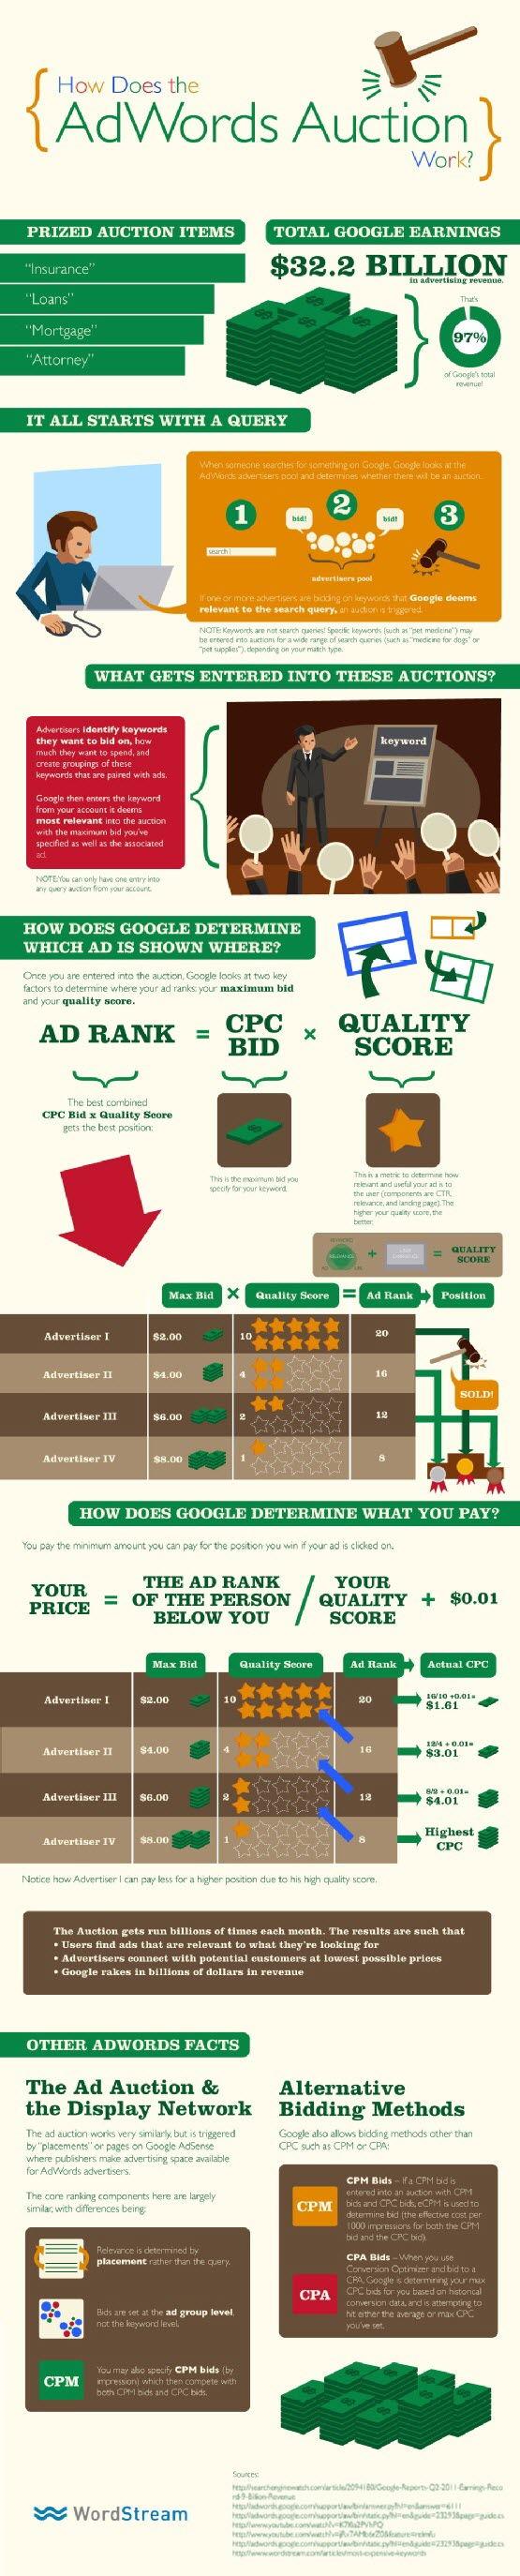 How does the AdWords Auction Work?